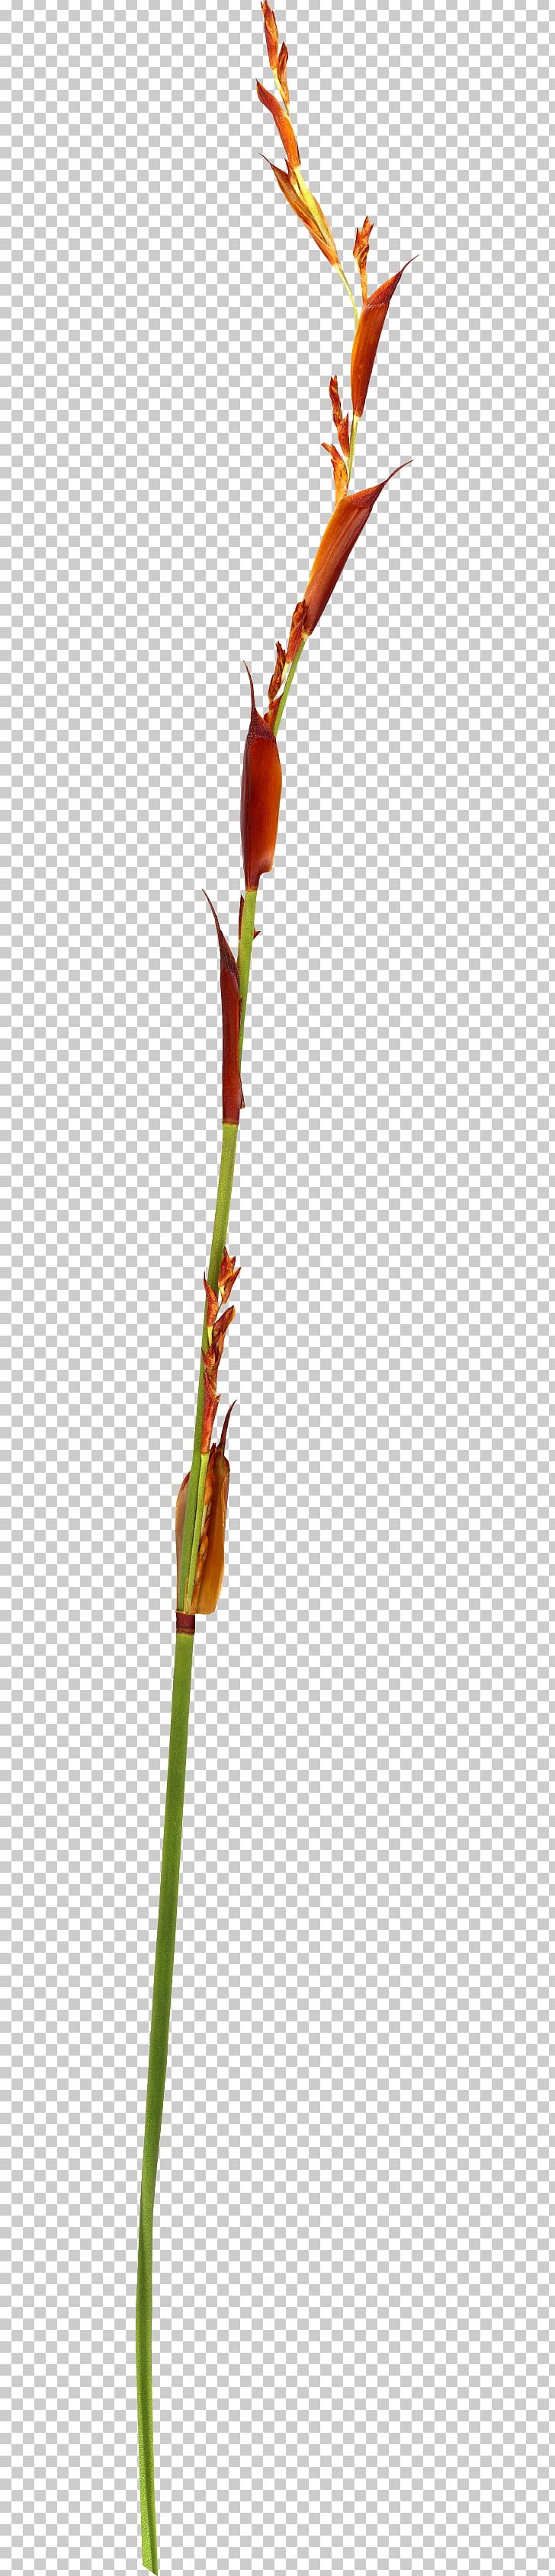 Twig Plant Stem Bud Leaf PNG, Clipart, Branch, Branching, Bud, Family, Flora Free PNG Download